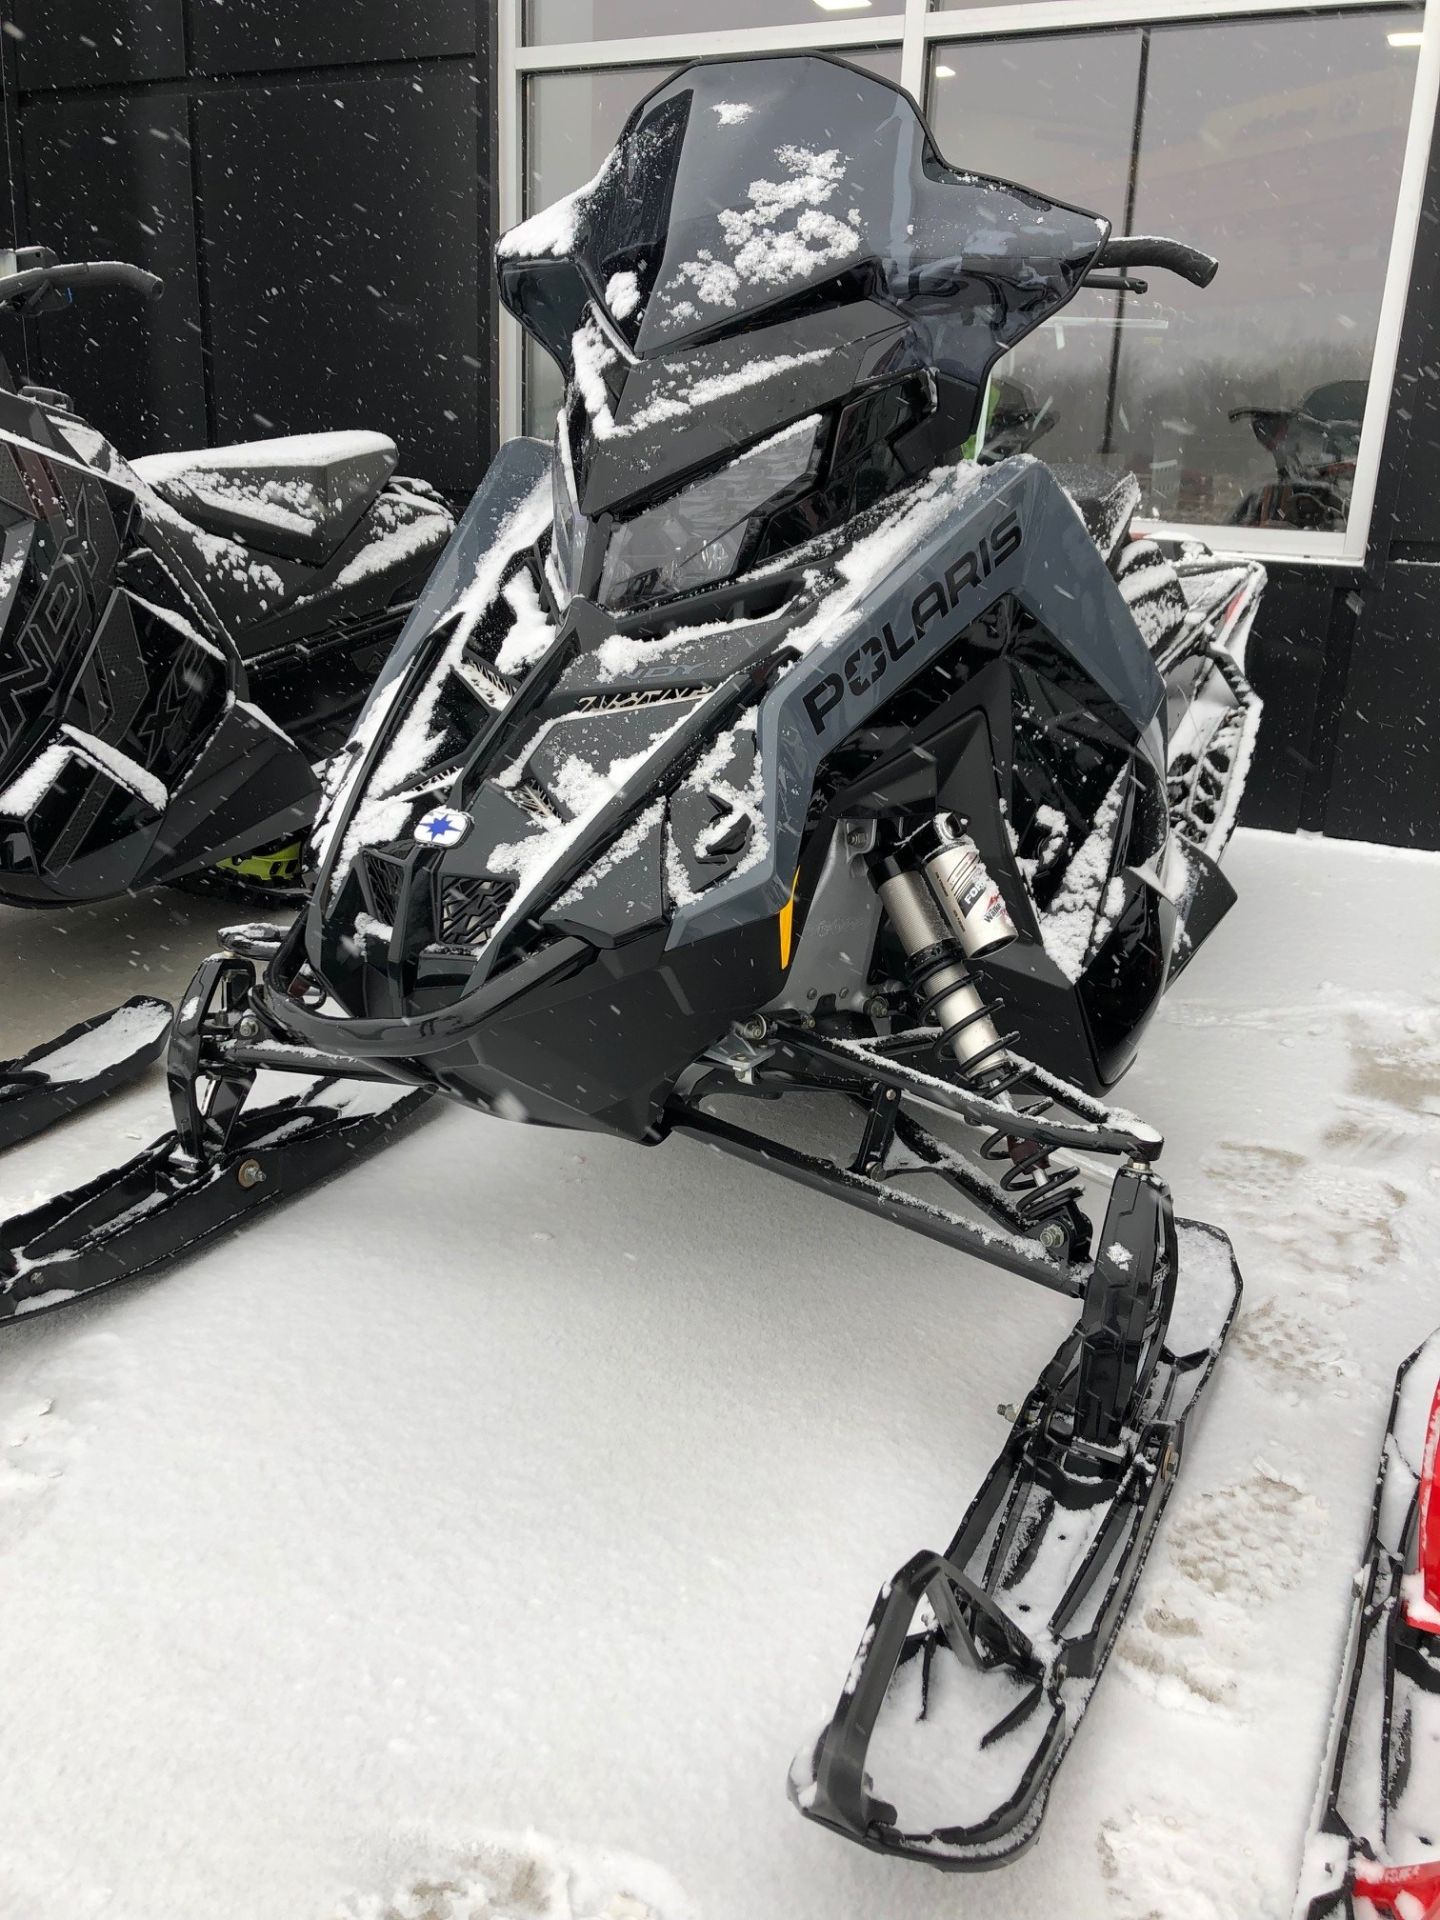 2021 Polaris 850 Indy XC 129 Launch Edition Factory Choice in Suamico, Wisconsin - Photo 1